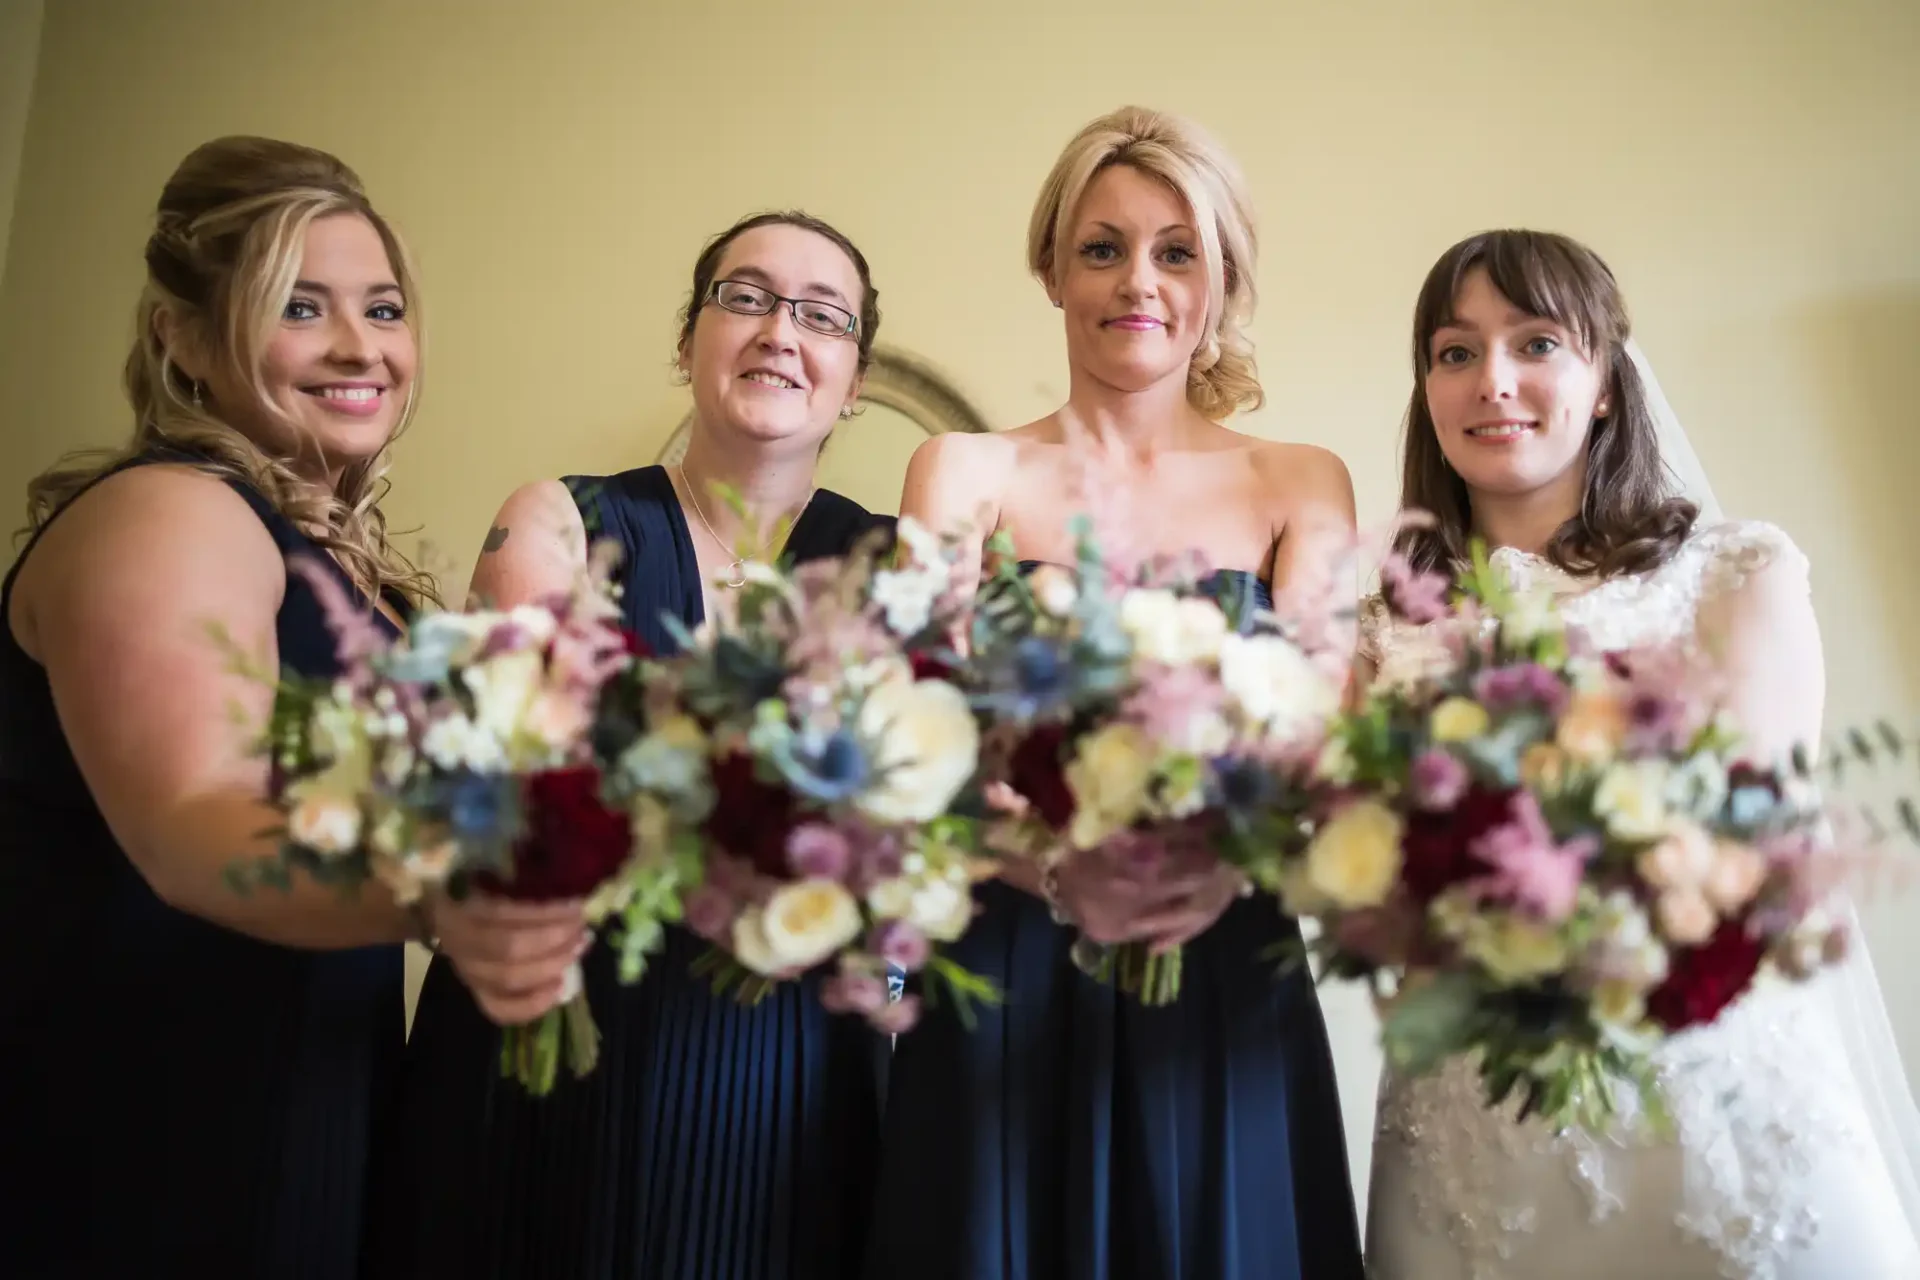 Four women in formal attire, one in a white bridal dress and others in dark dresses, smiling and holding floral bouquets.